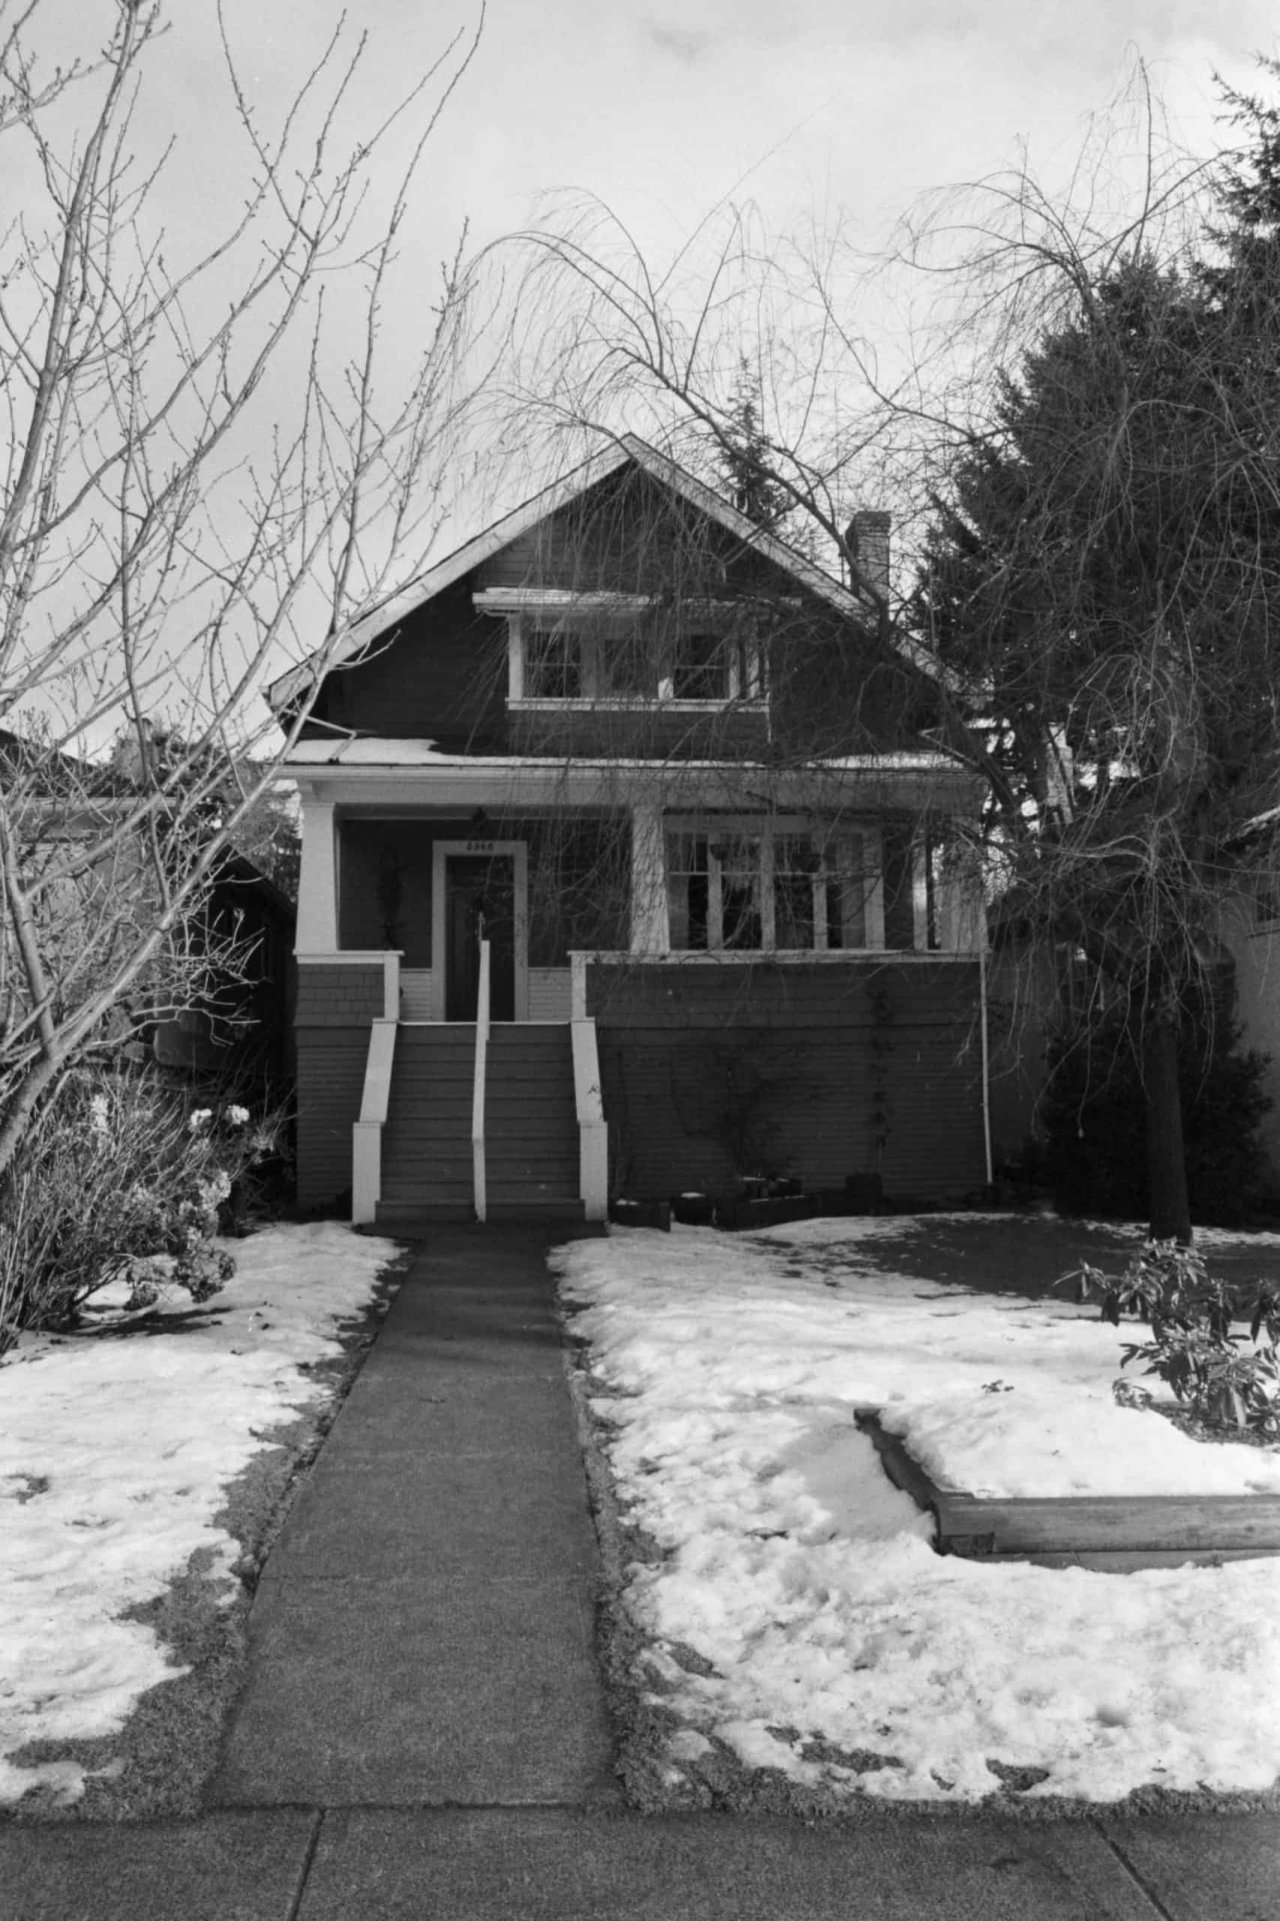 5368 Blenheim in the mid-1980s. City of Vancouver Archives, CVA 790-2294.